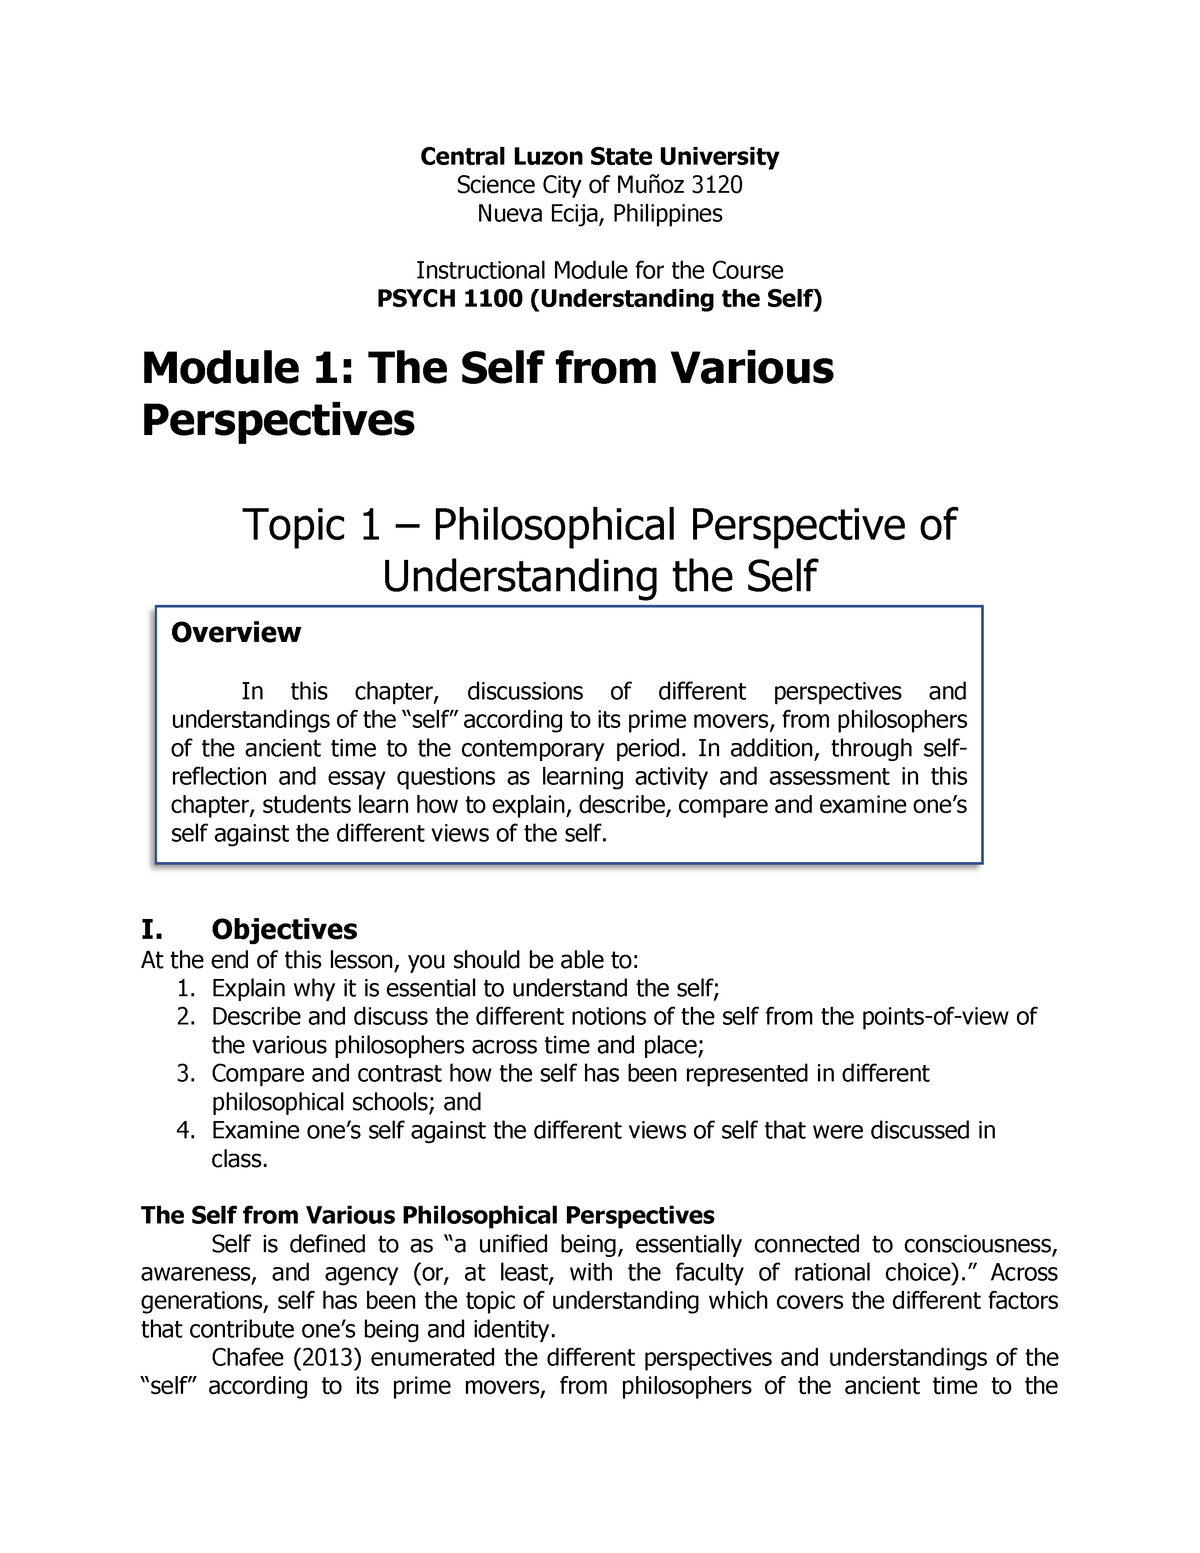 the philosophical perspective of the self essay